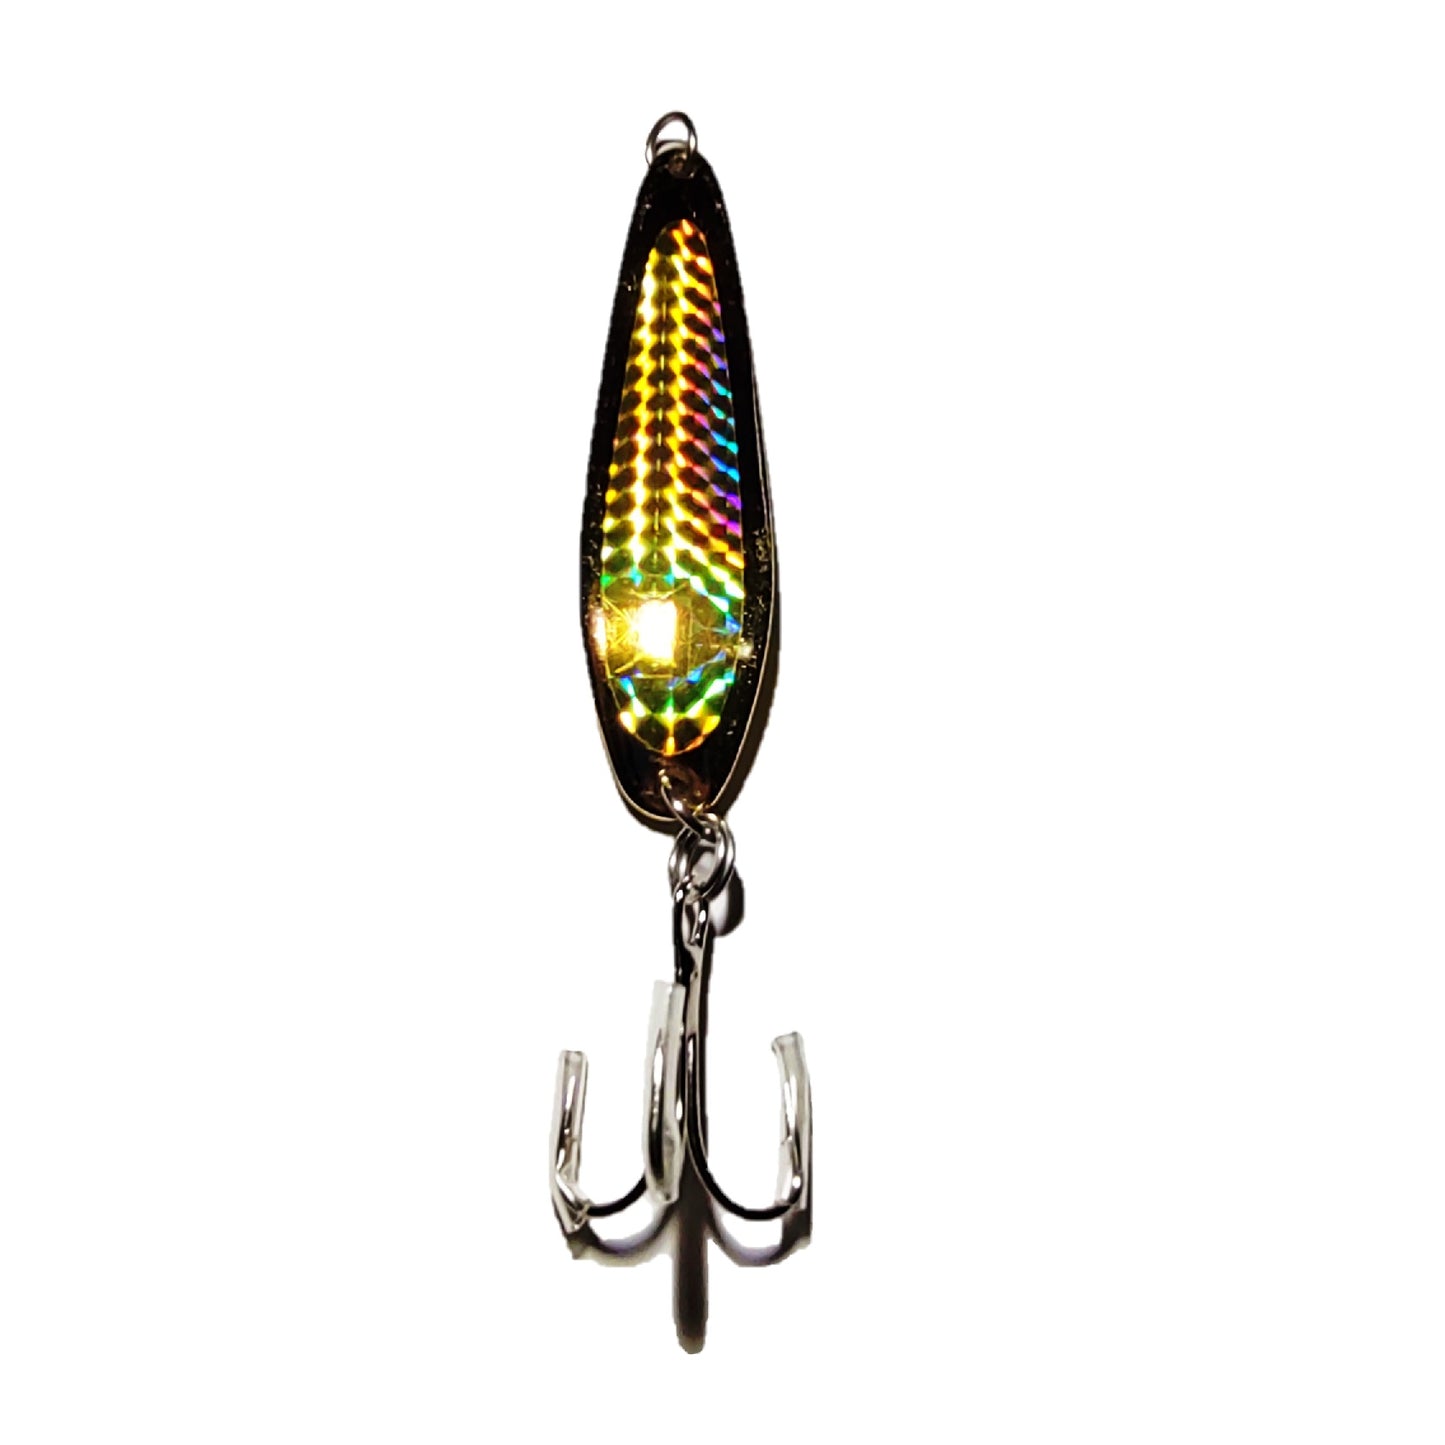 Fishing Spoon with a Treble Hook 5oz Gold